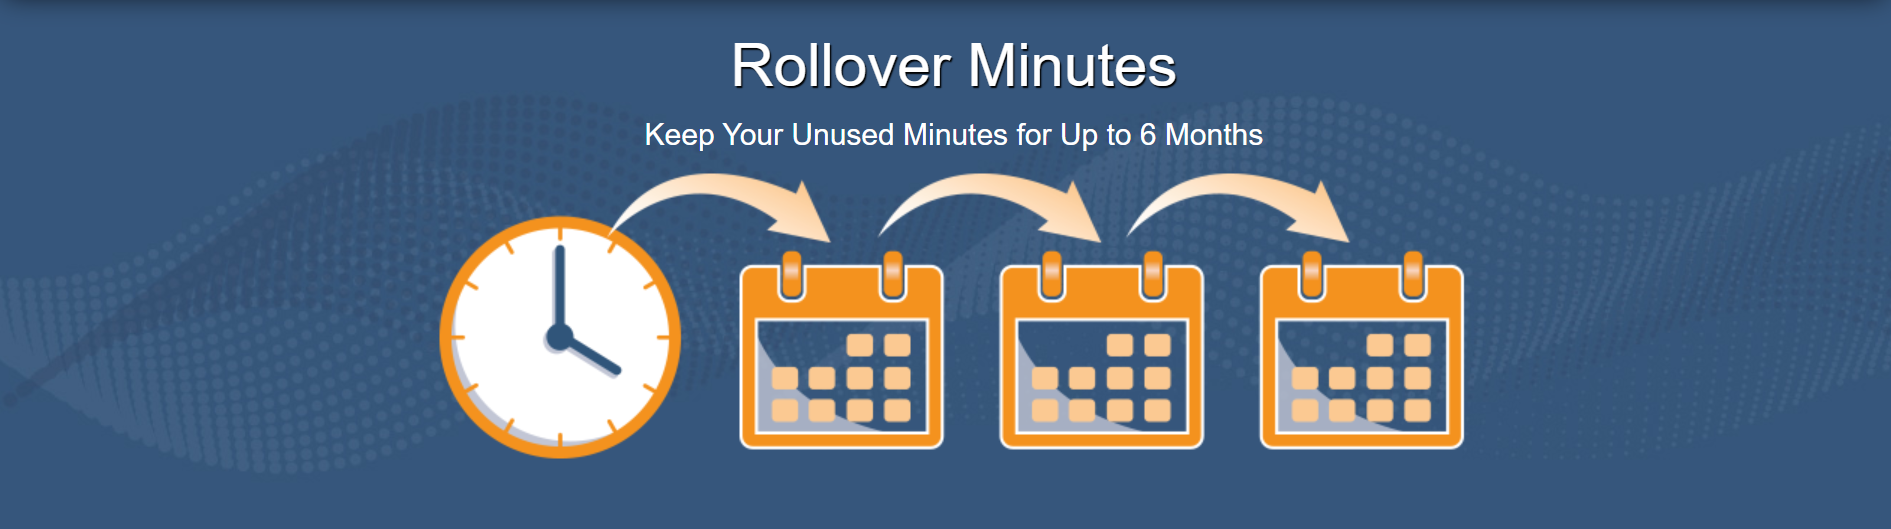 Rollover Minutes